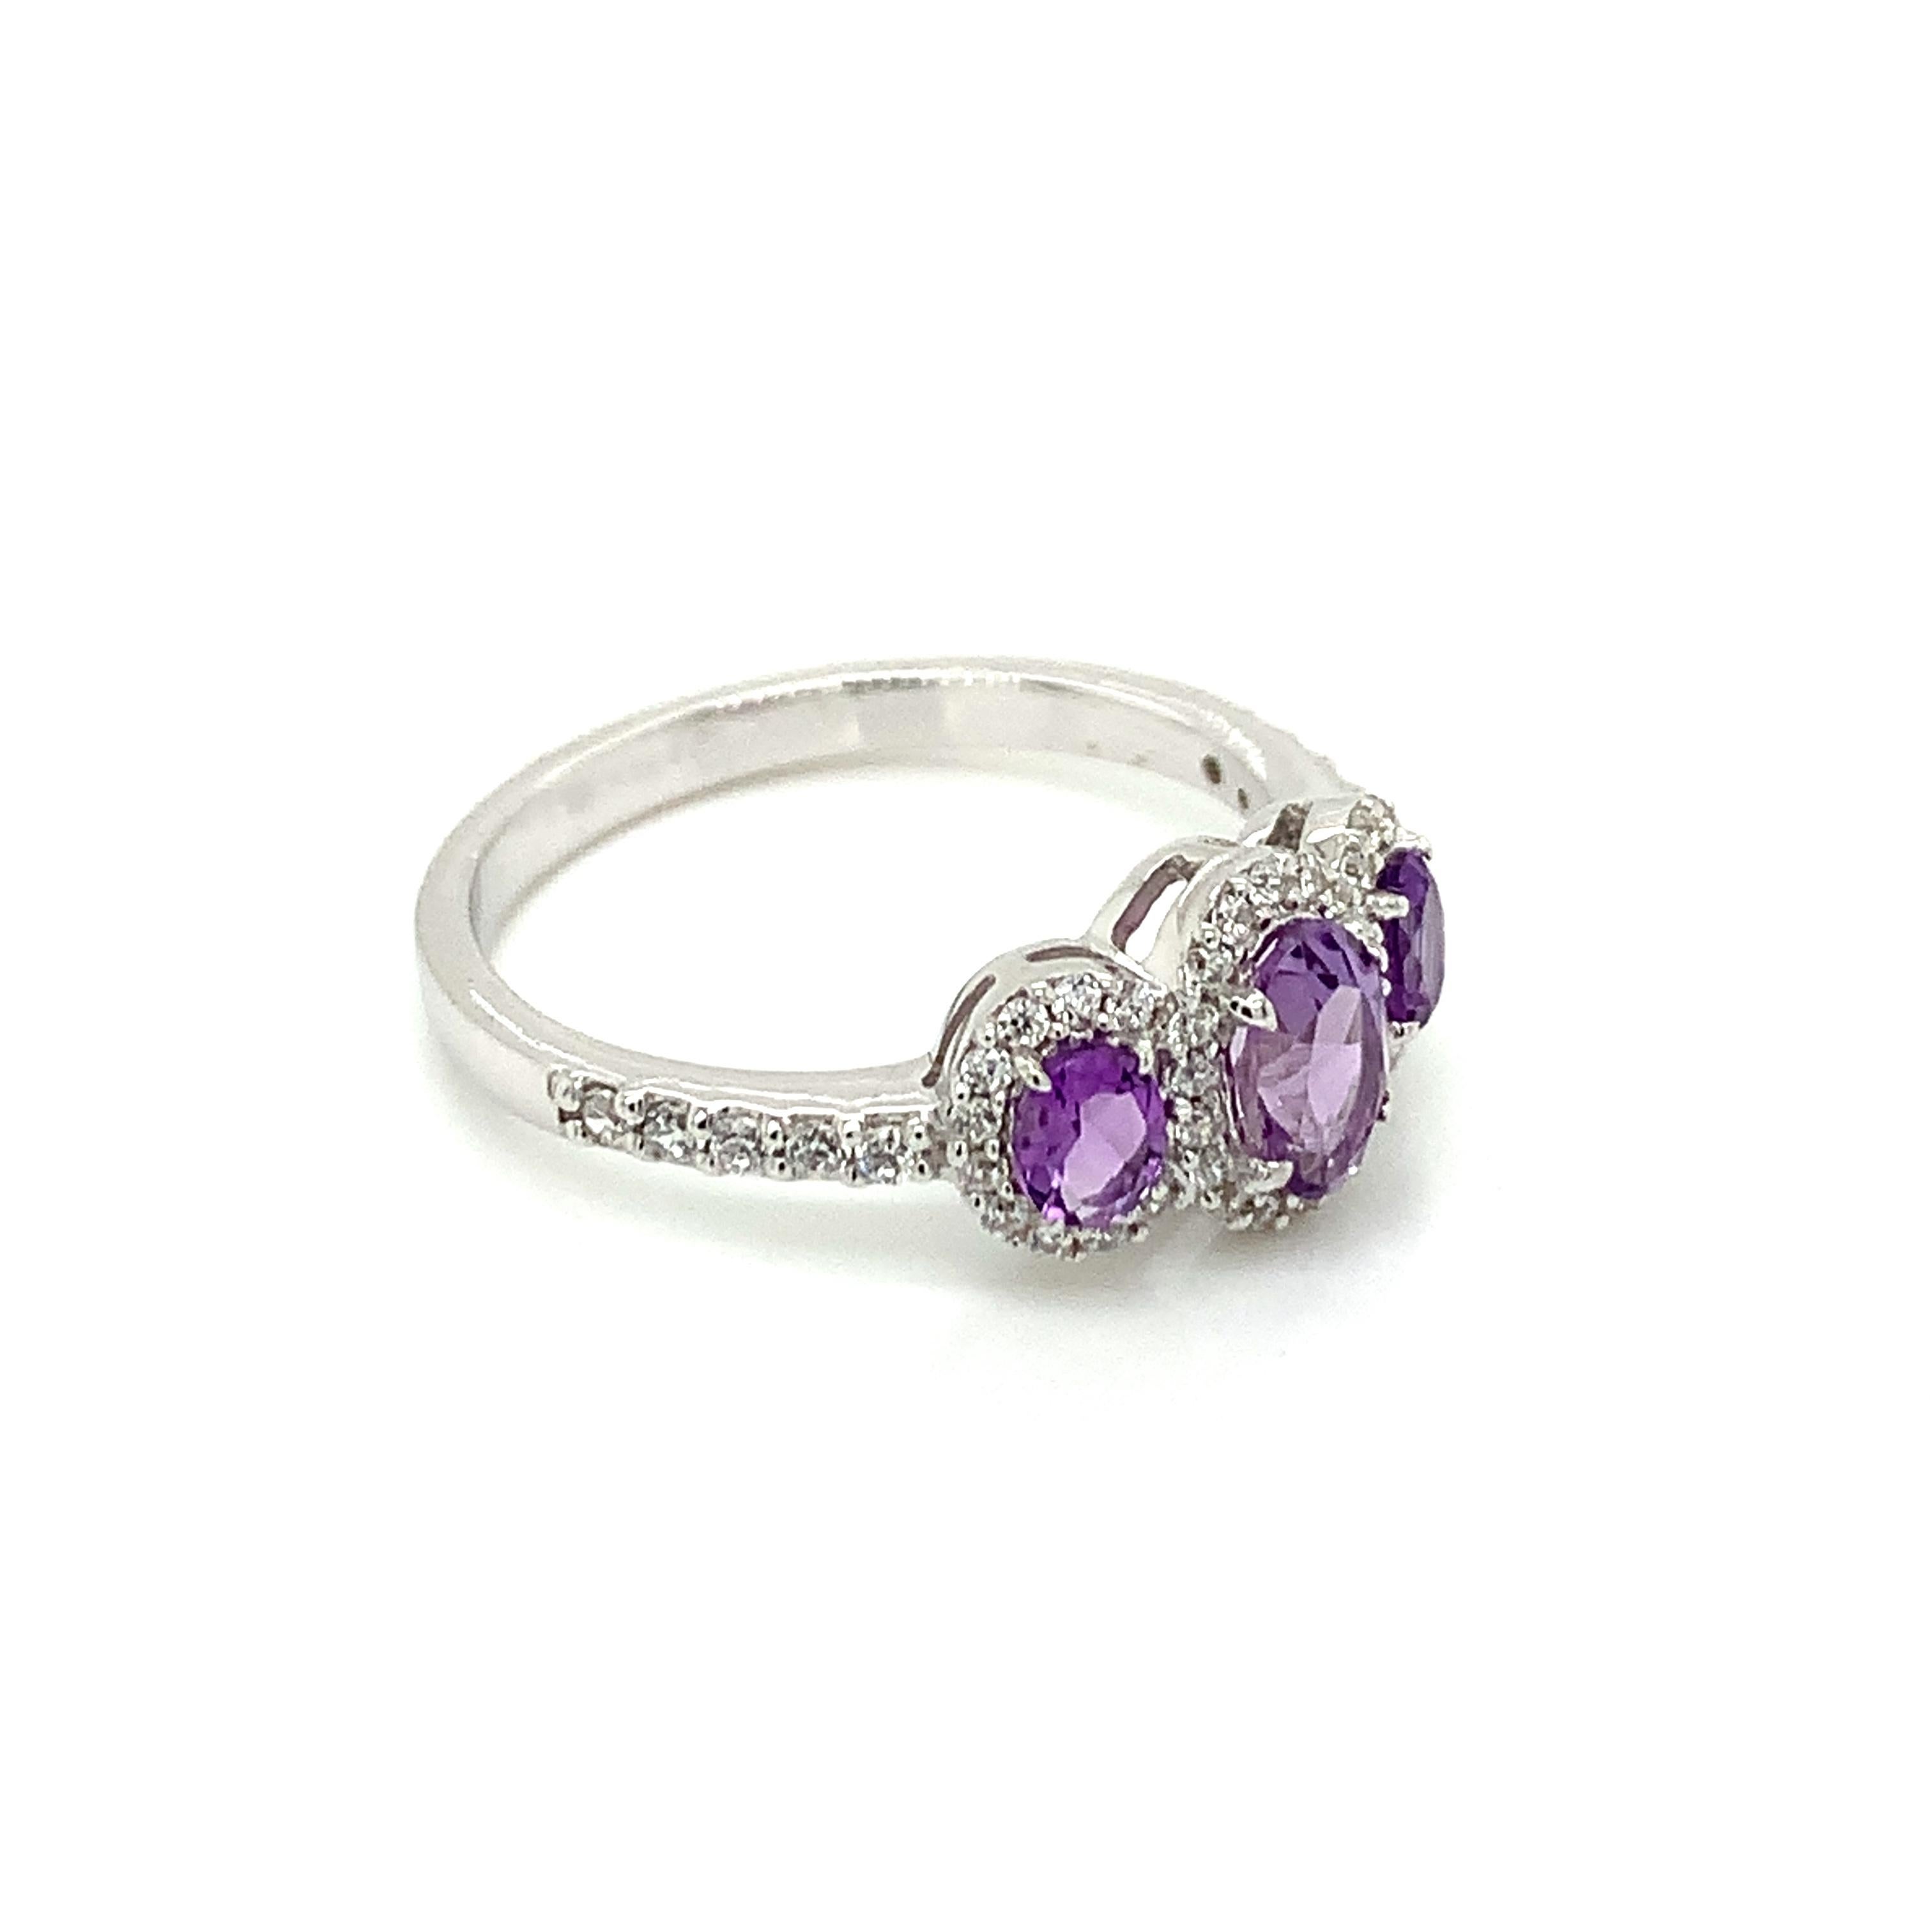 Oval Shape Amethyst Gemstone beautifully crafted with CZ in a Ring. A fiery Violet Color February Birthstone. For a special occasion like Engagement or Proposal or may be as a gift for a special person.

Primary Stone Size - 6x4 & 4x3 mm